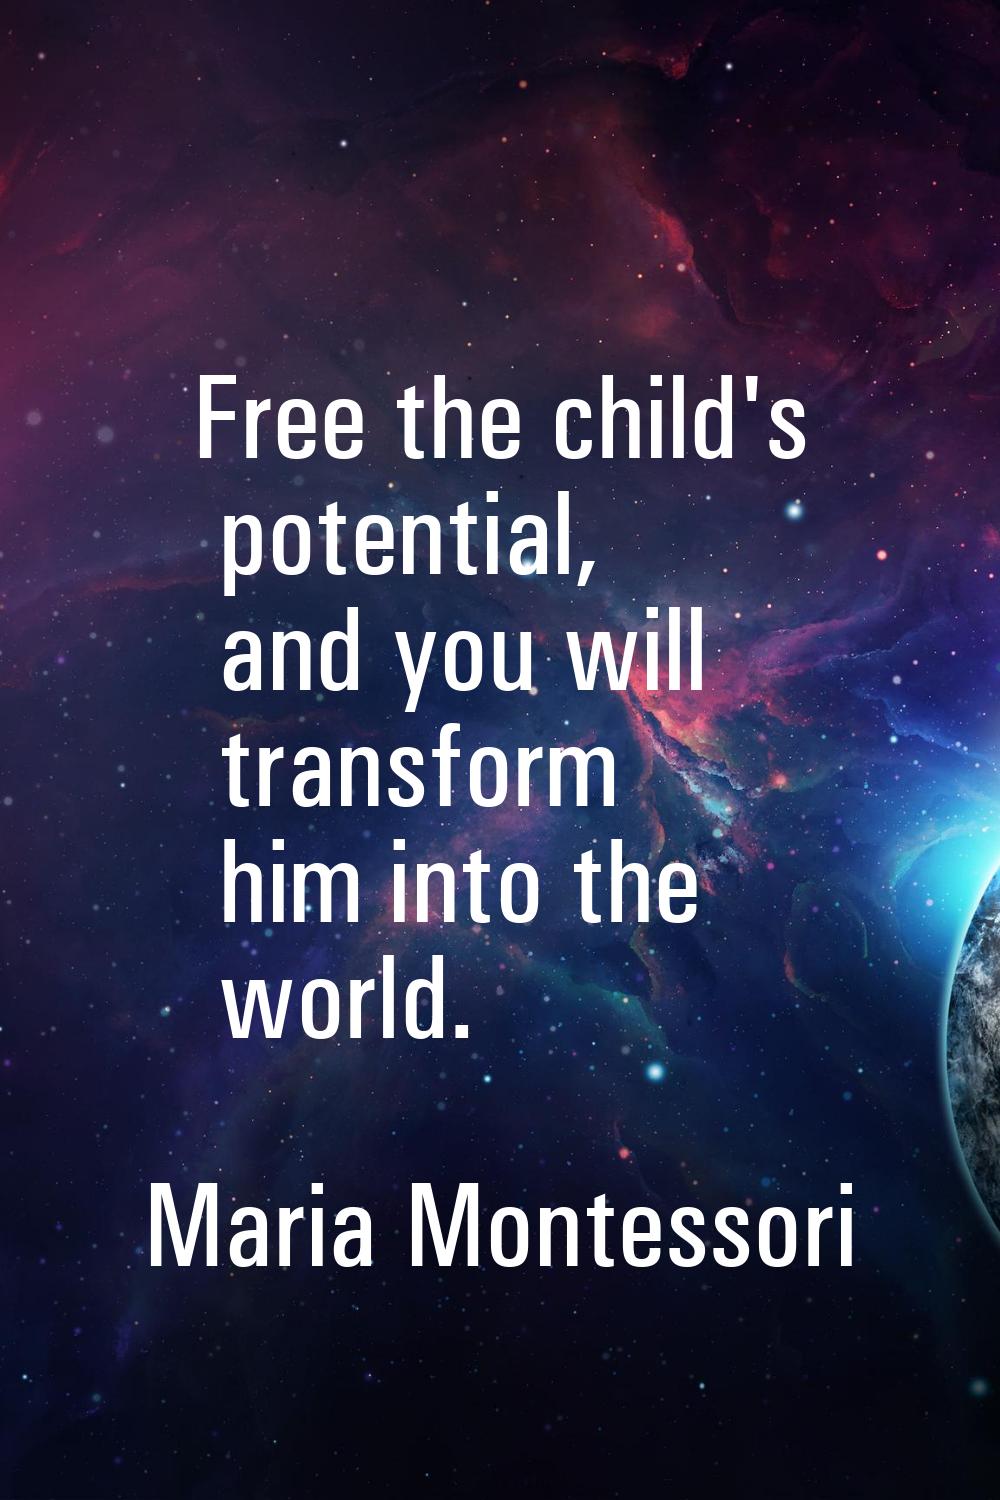 Free the child's potential, and you will transform him into the world.